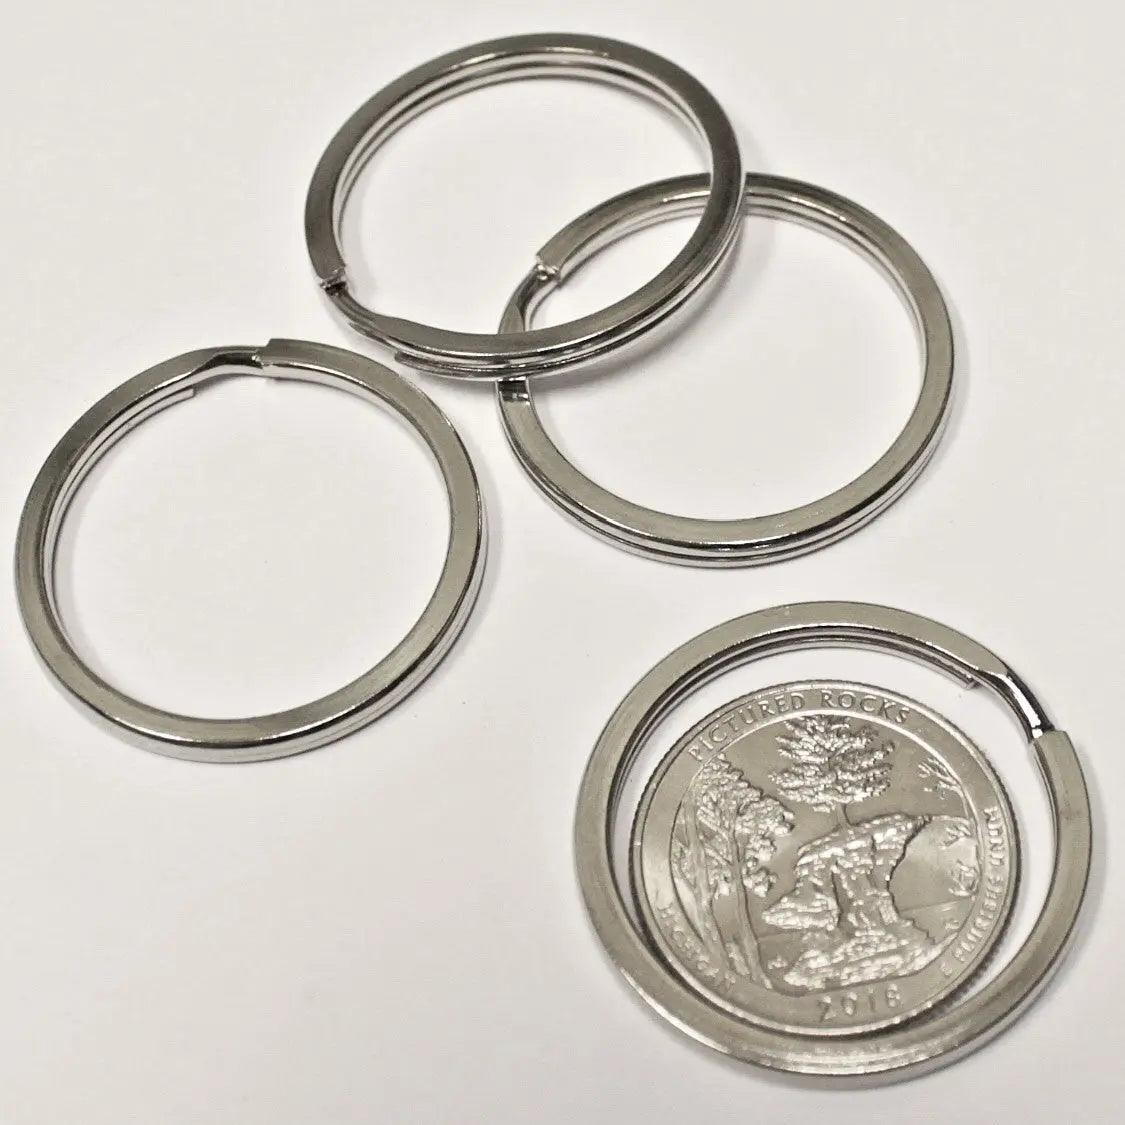 1 1/4 Inch Silver Key Ring (2 Pack)  paracordwholesale